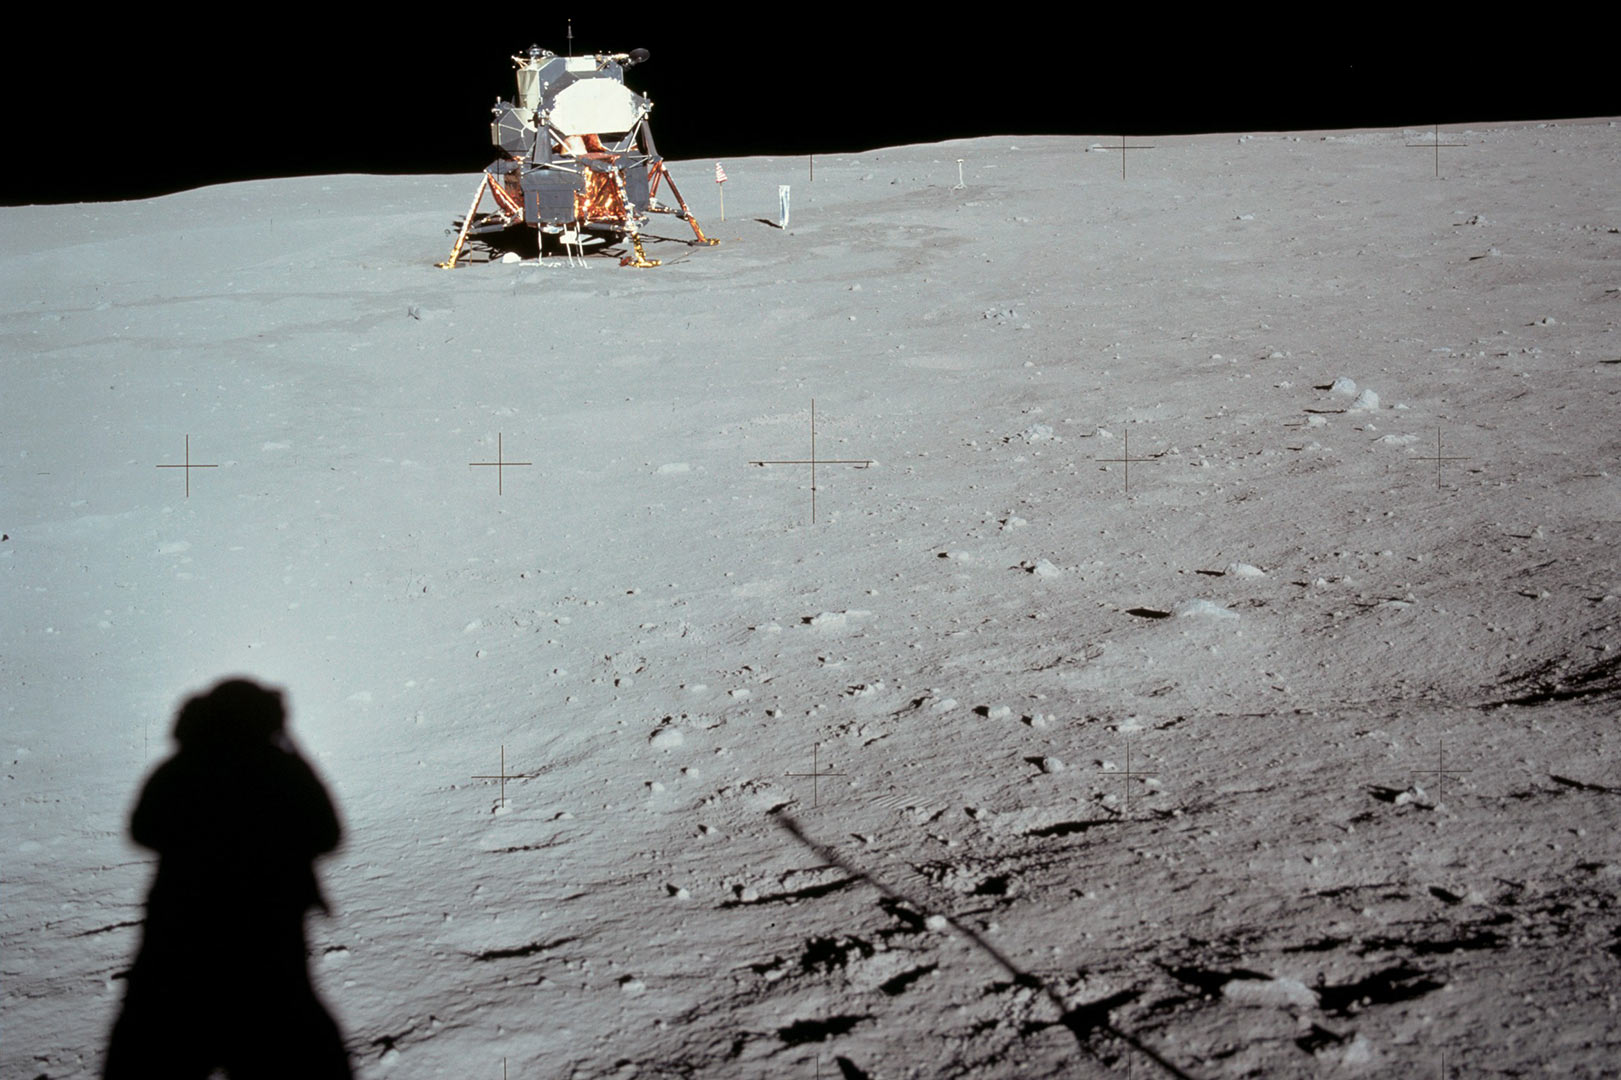 lunar module and Tranquility Base